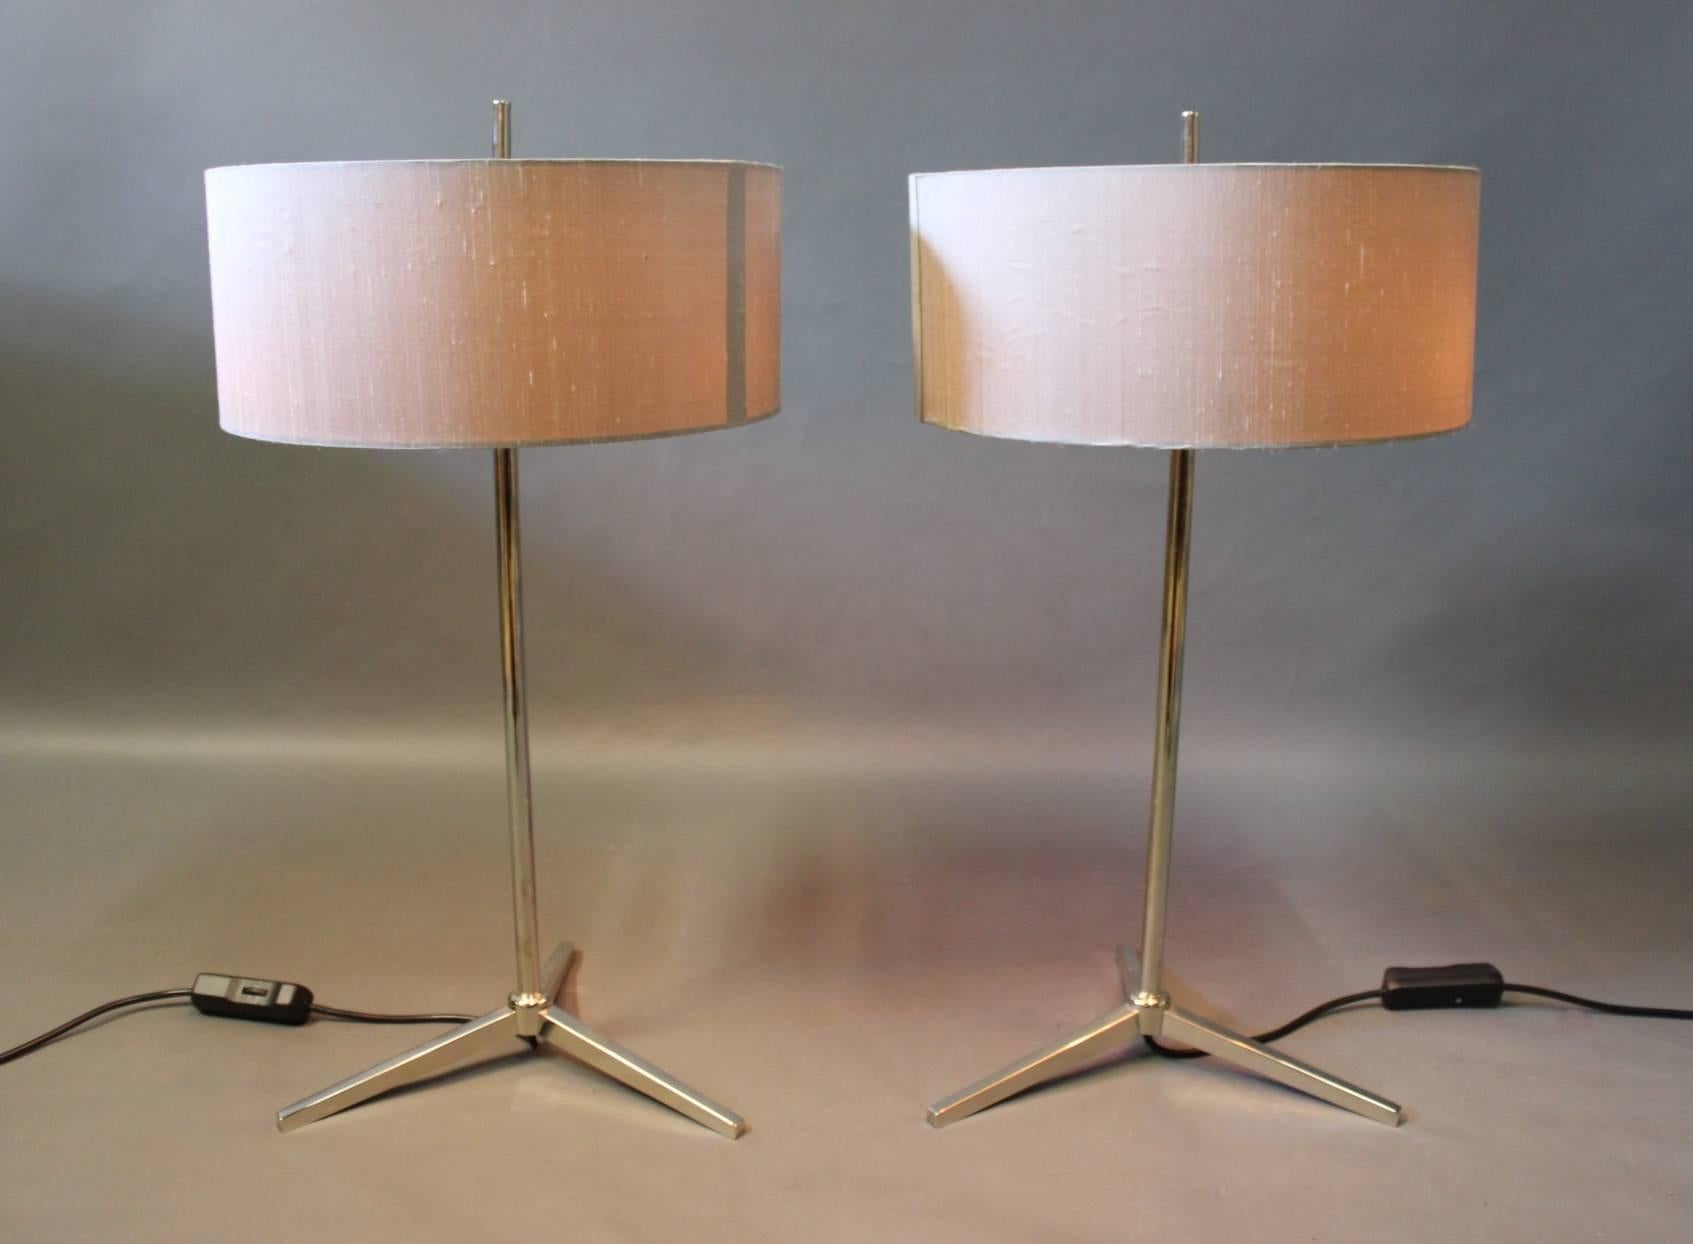 A set of two table lamps of chrome-plated metal and grey lamp shades of Italian design from the 1980s. The lamps has three light bulbs and a dimmer function.